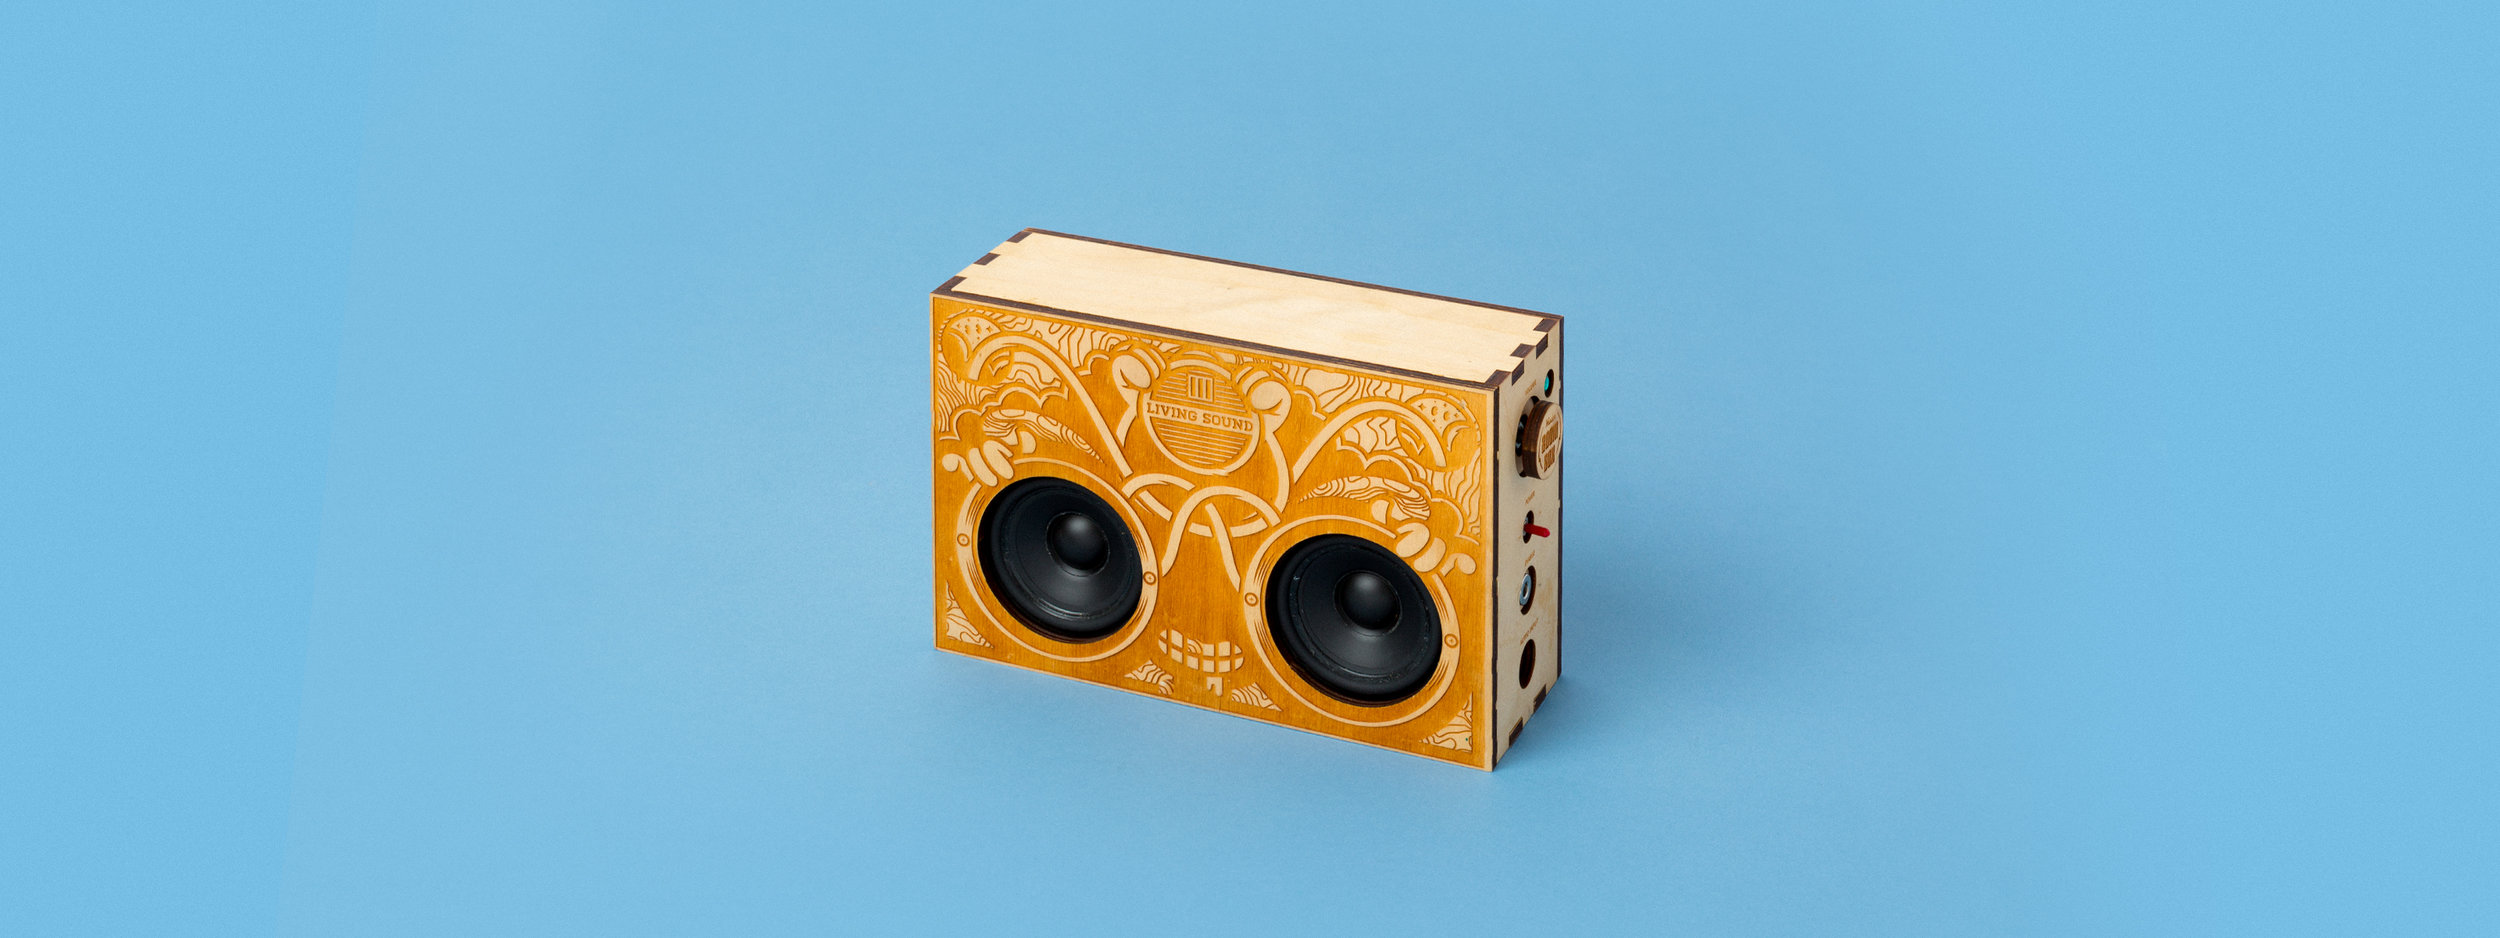 laser cut wood, laser engraved wood, finger joint box, boom box, blue tooth  